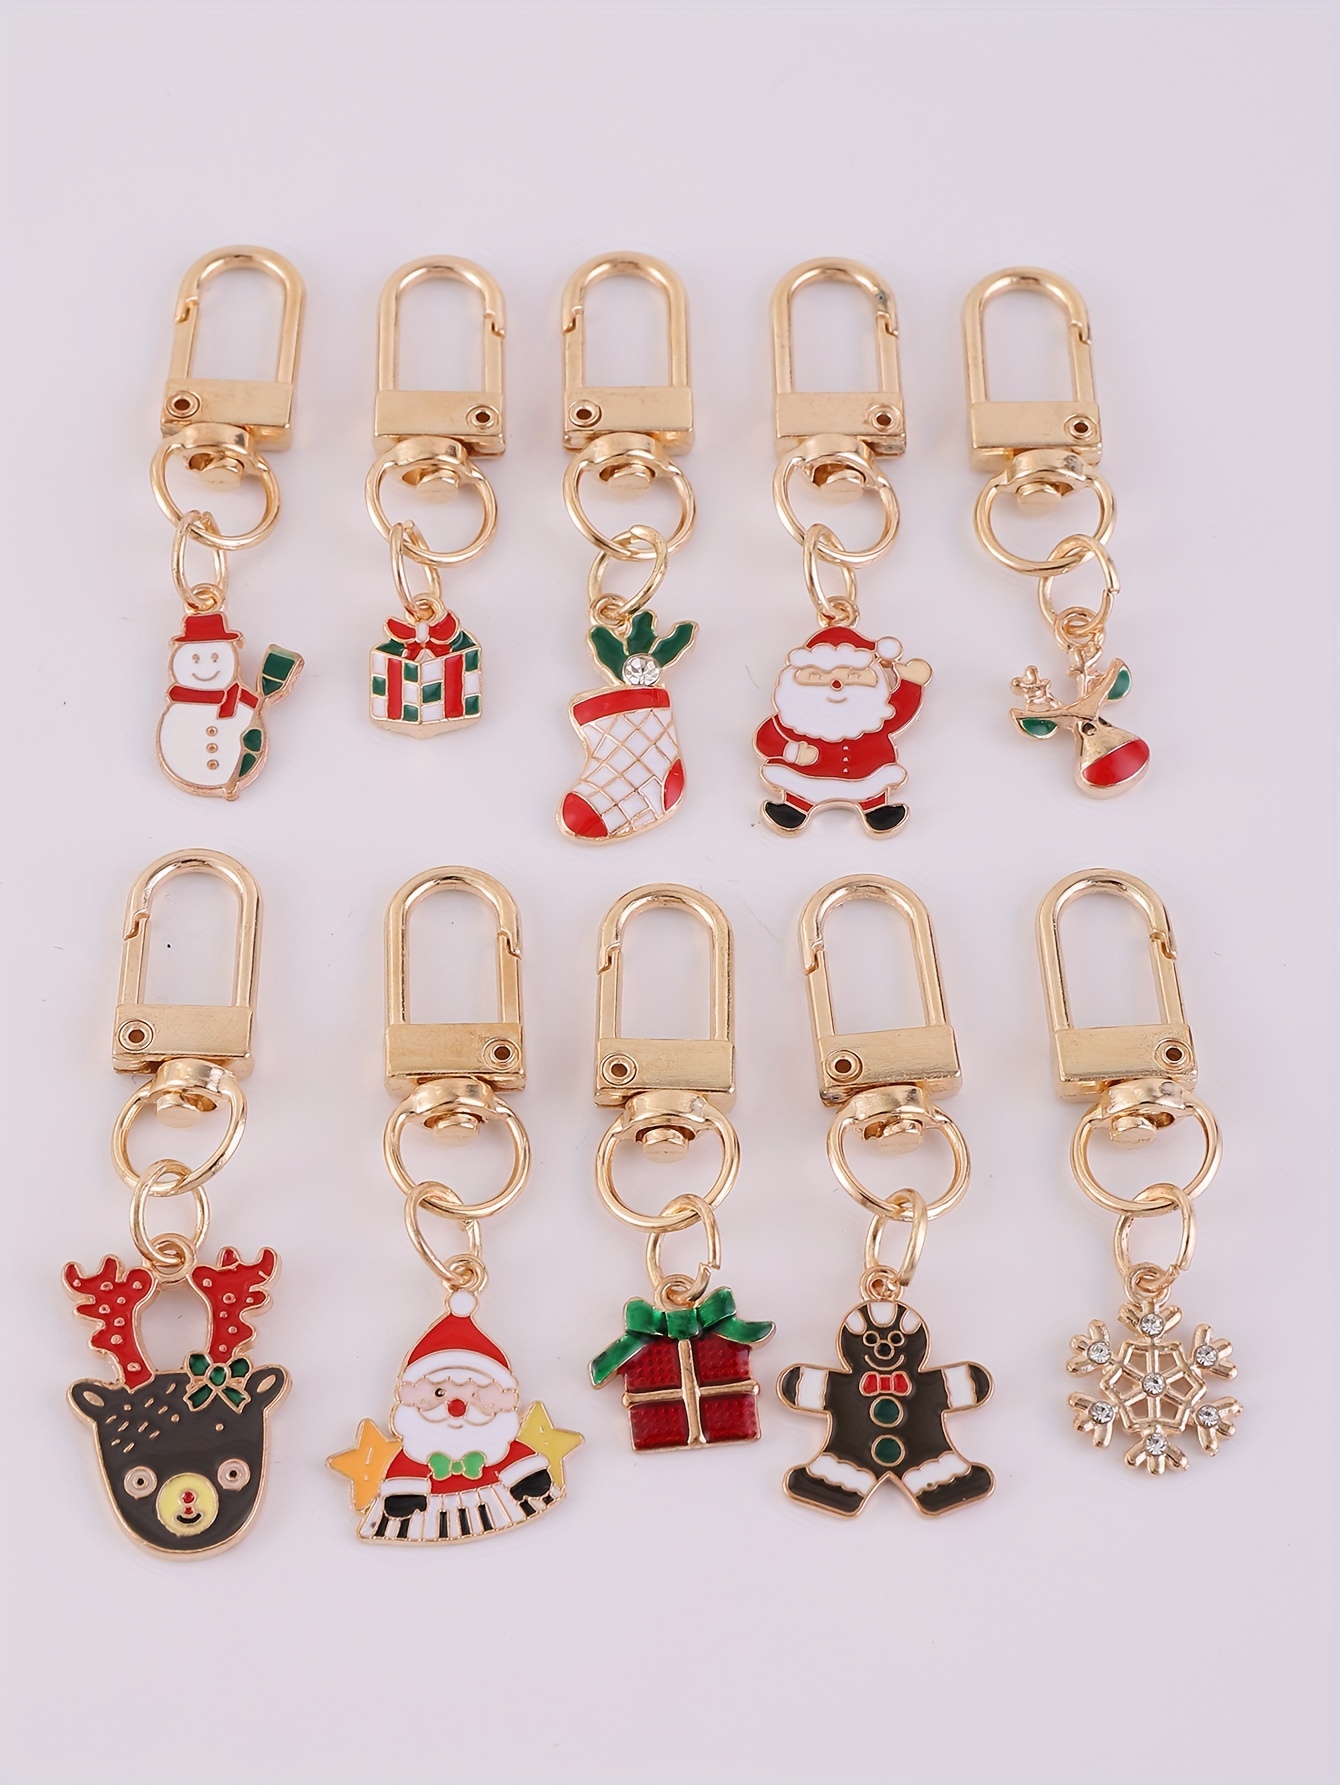 Temu Cute Perfume Bottle Keychain Golden Alloy Key Chain Ring Purse Bag Backpack Charm Earbud Case Cover Accessories Women, Christmas Styling & Gift